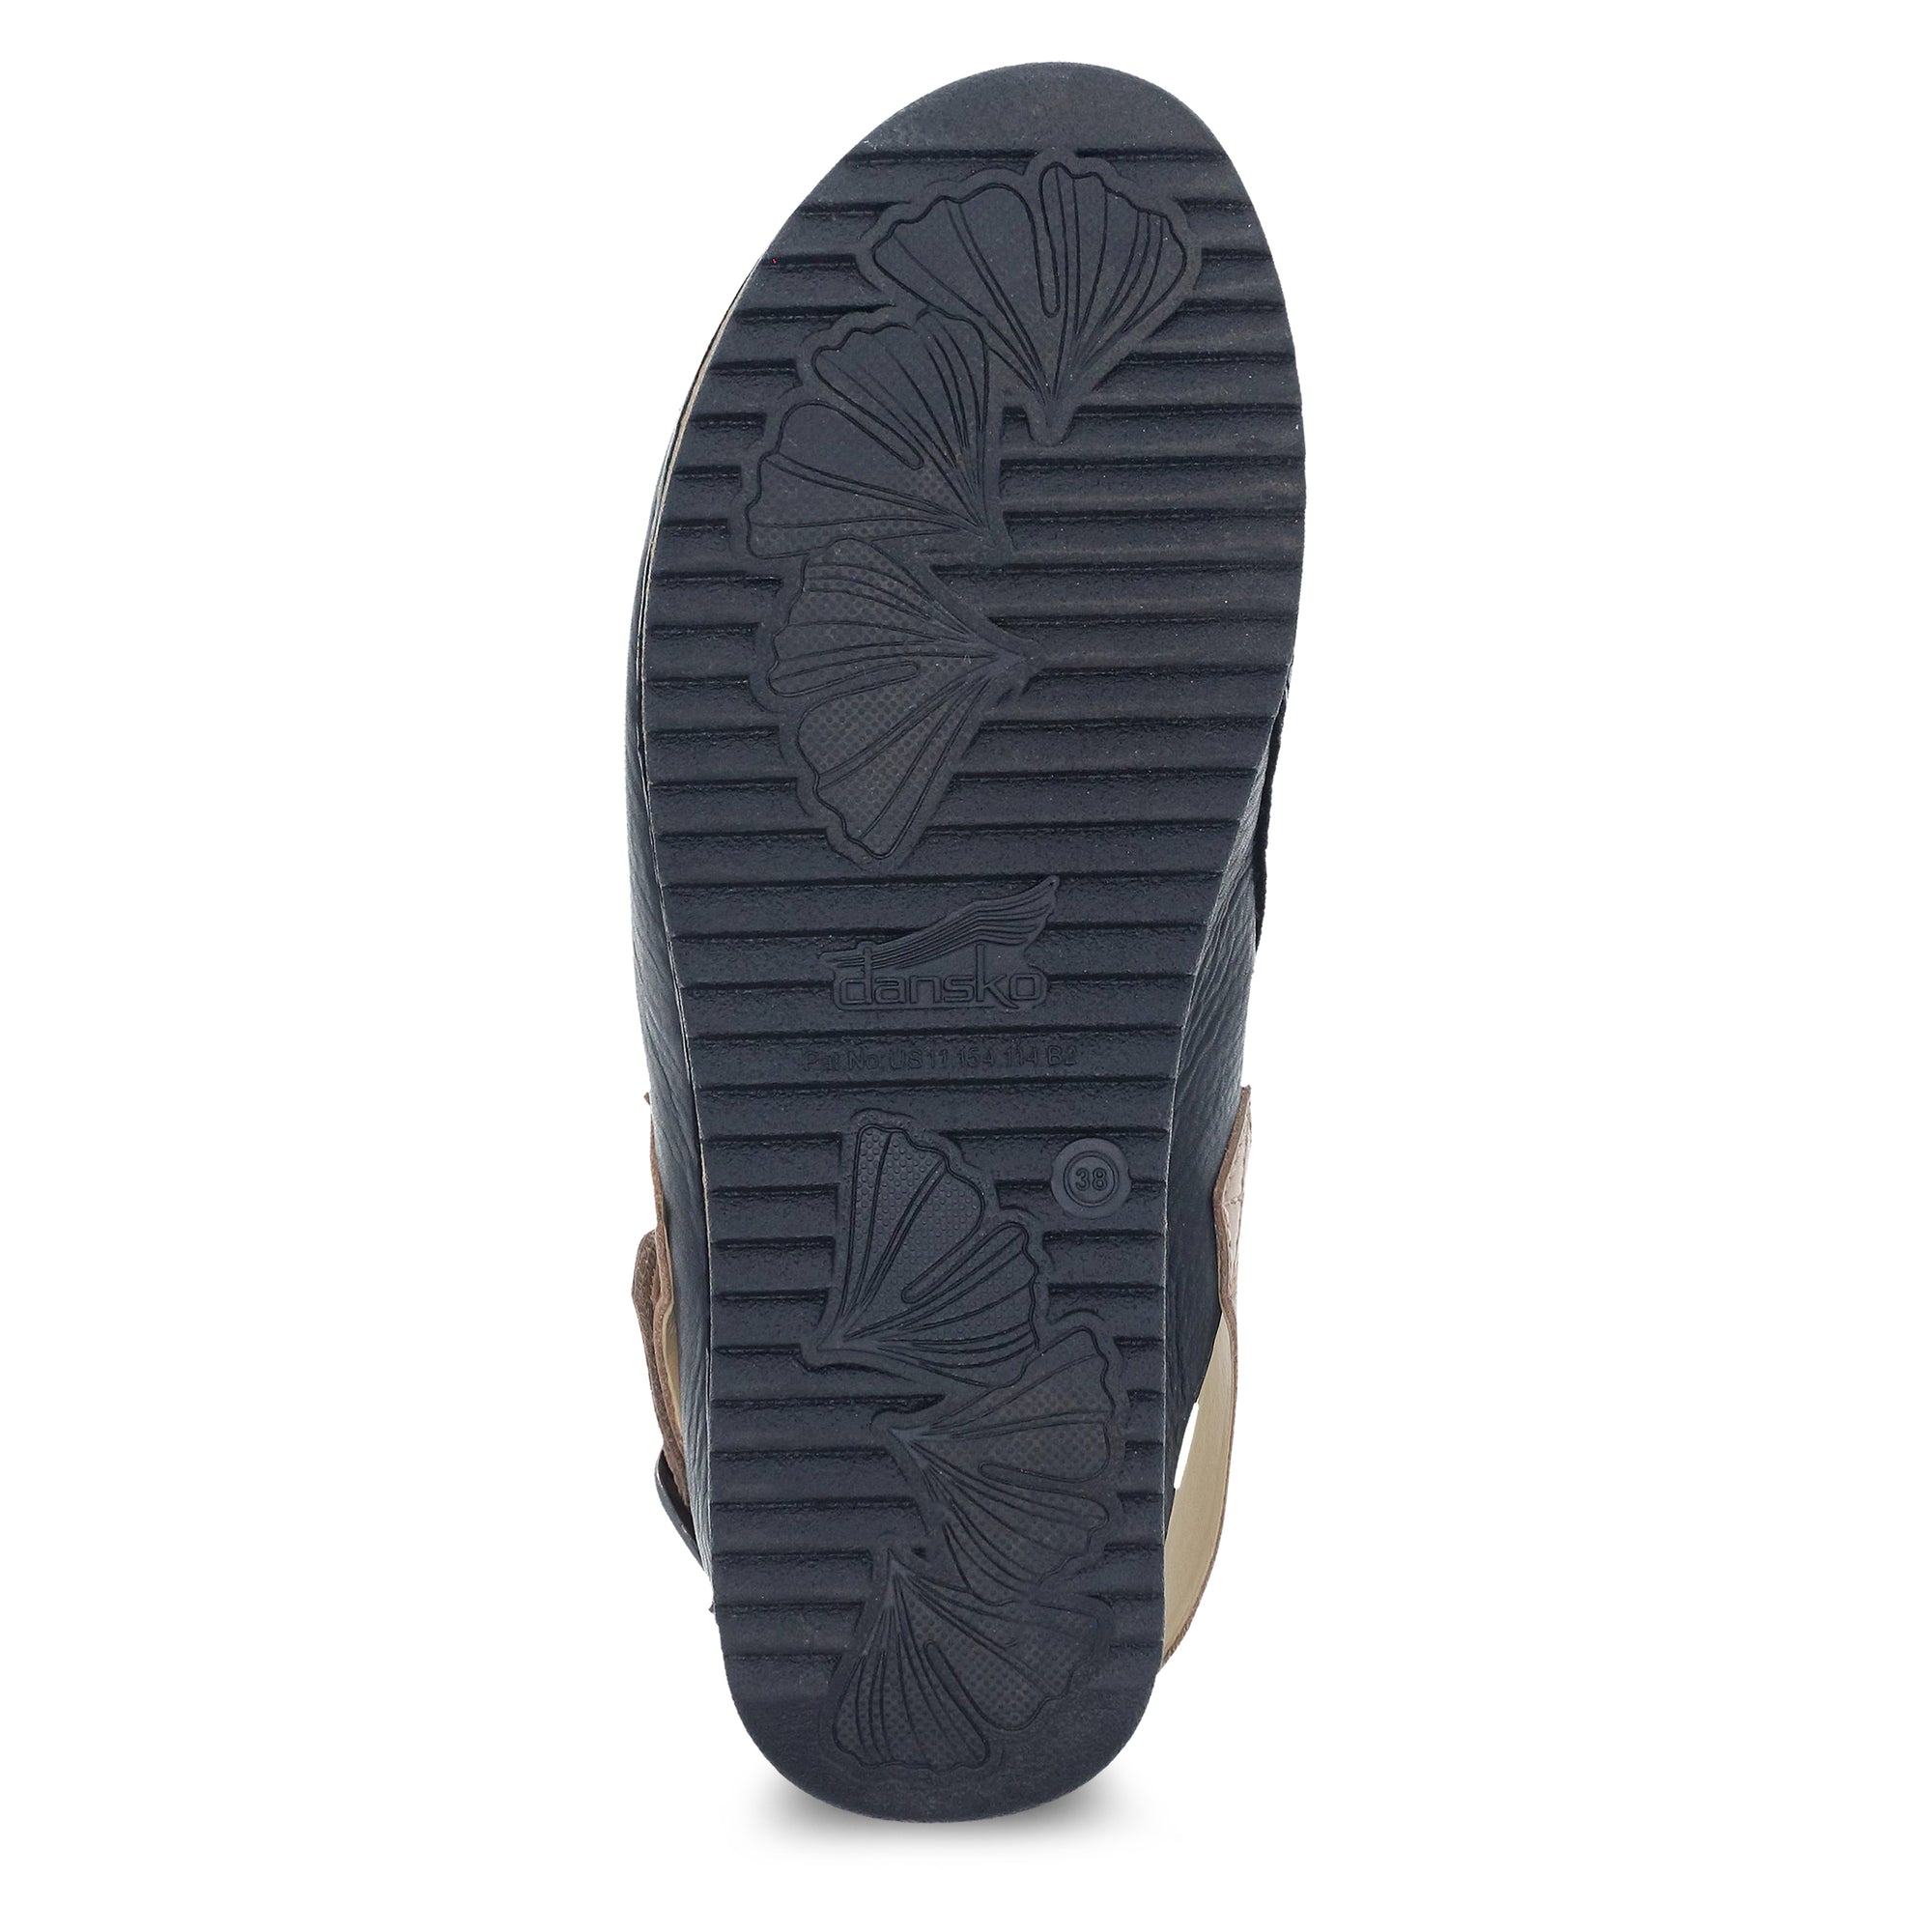 Sole image of Merrin Black Waxy Milled